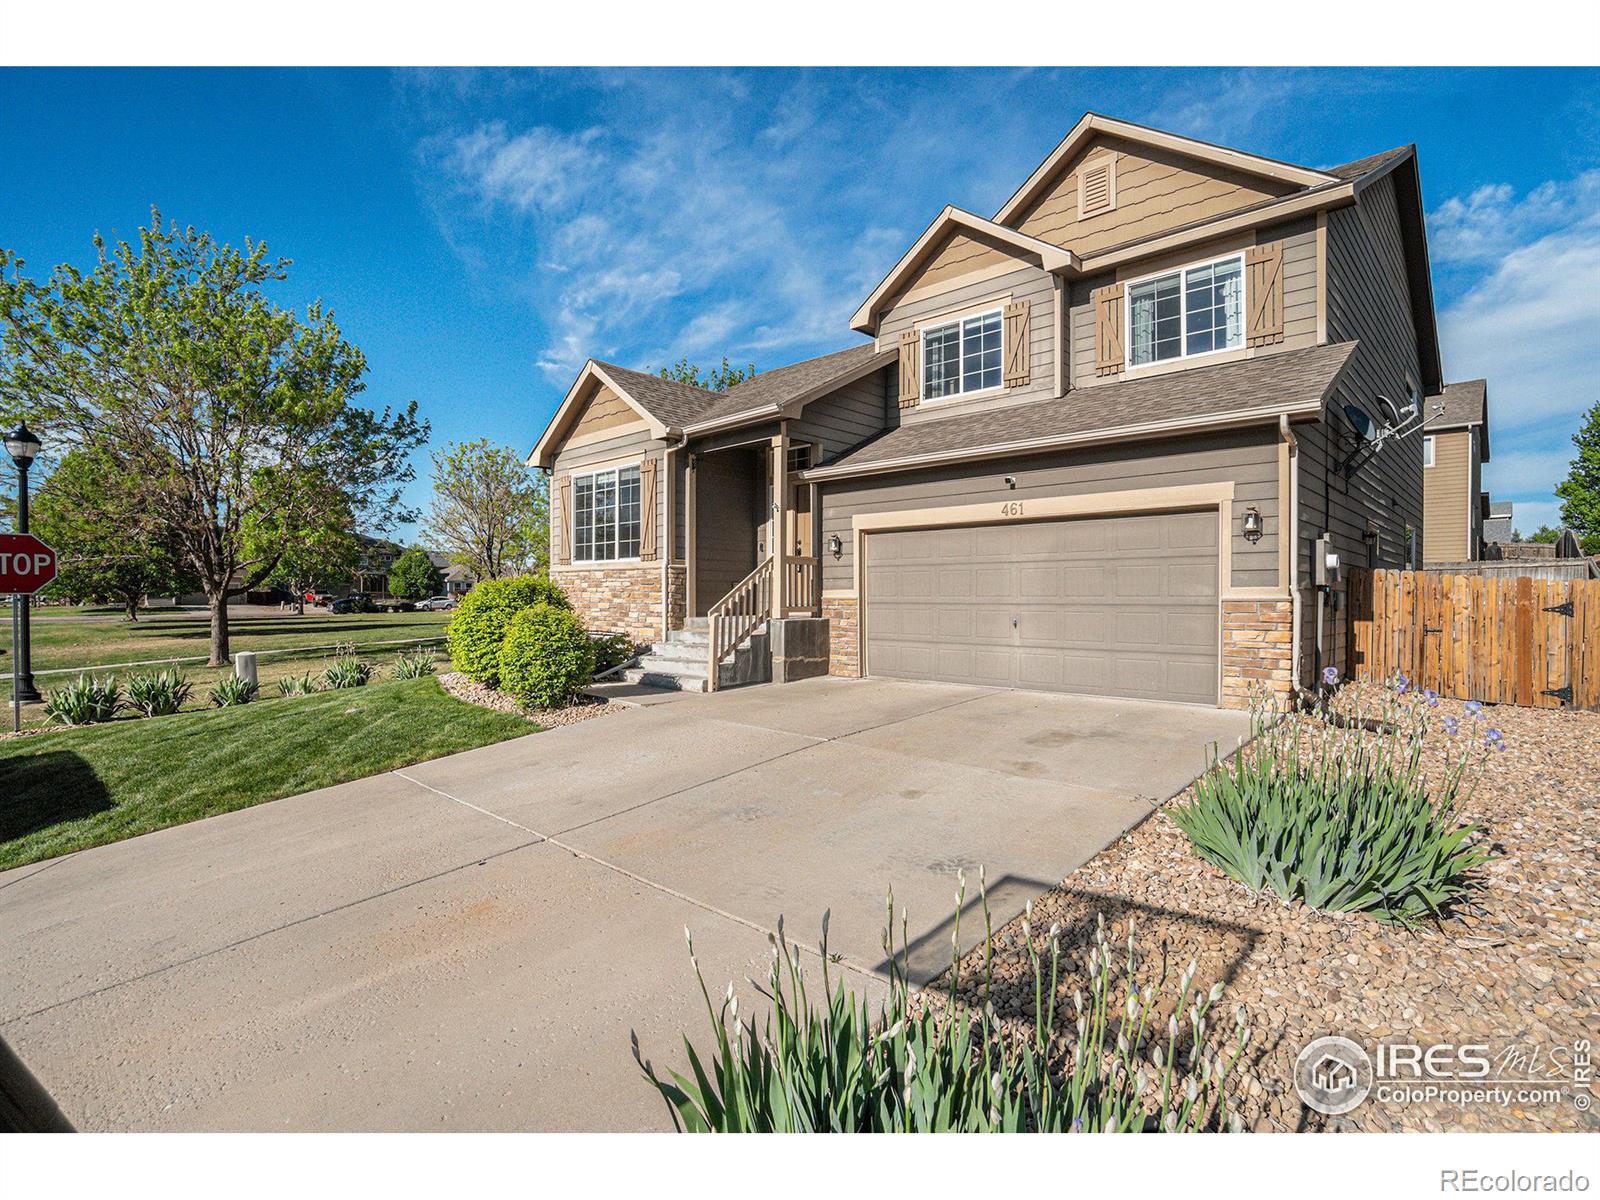 Report Image for 461  Territory Lane,Johnstown, Colorado